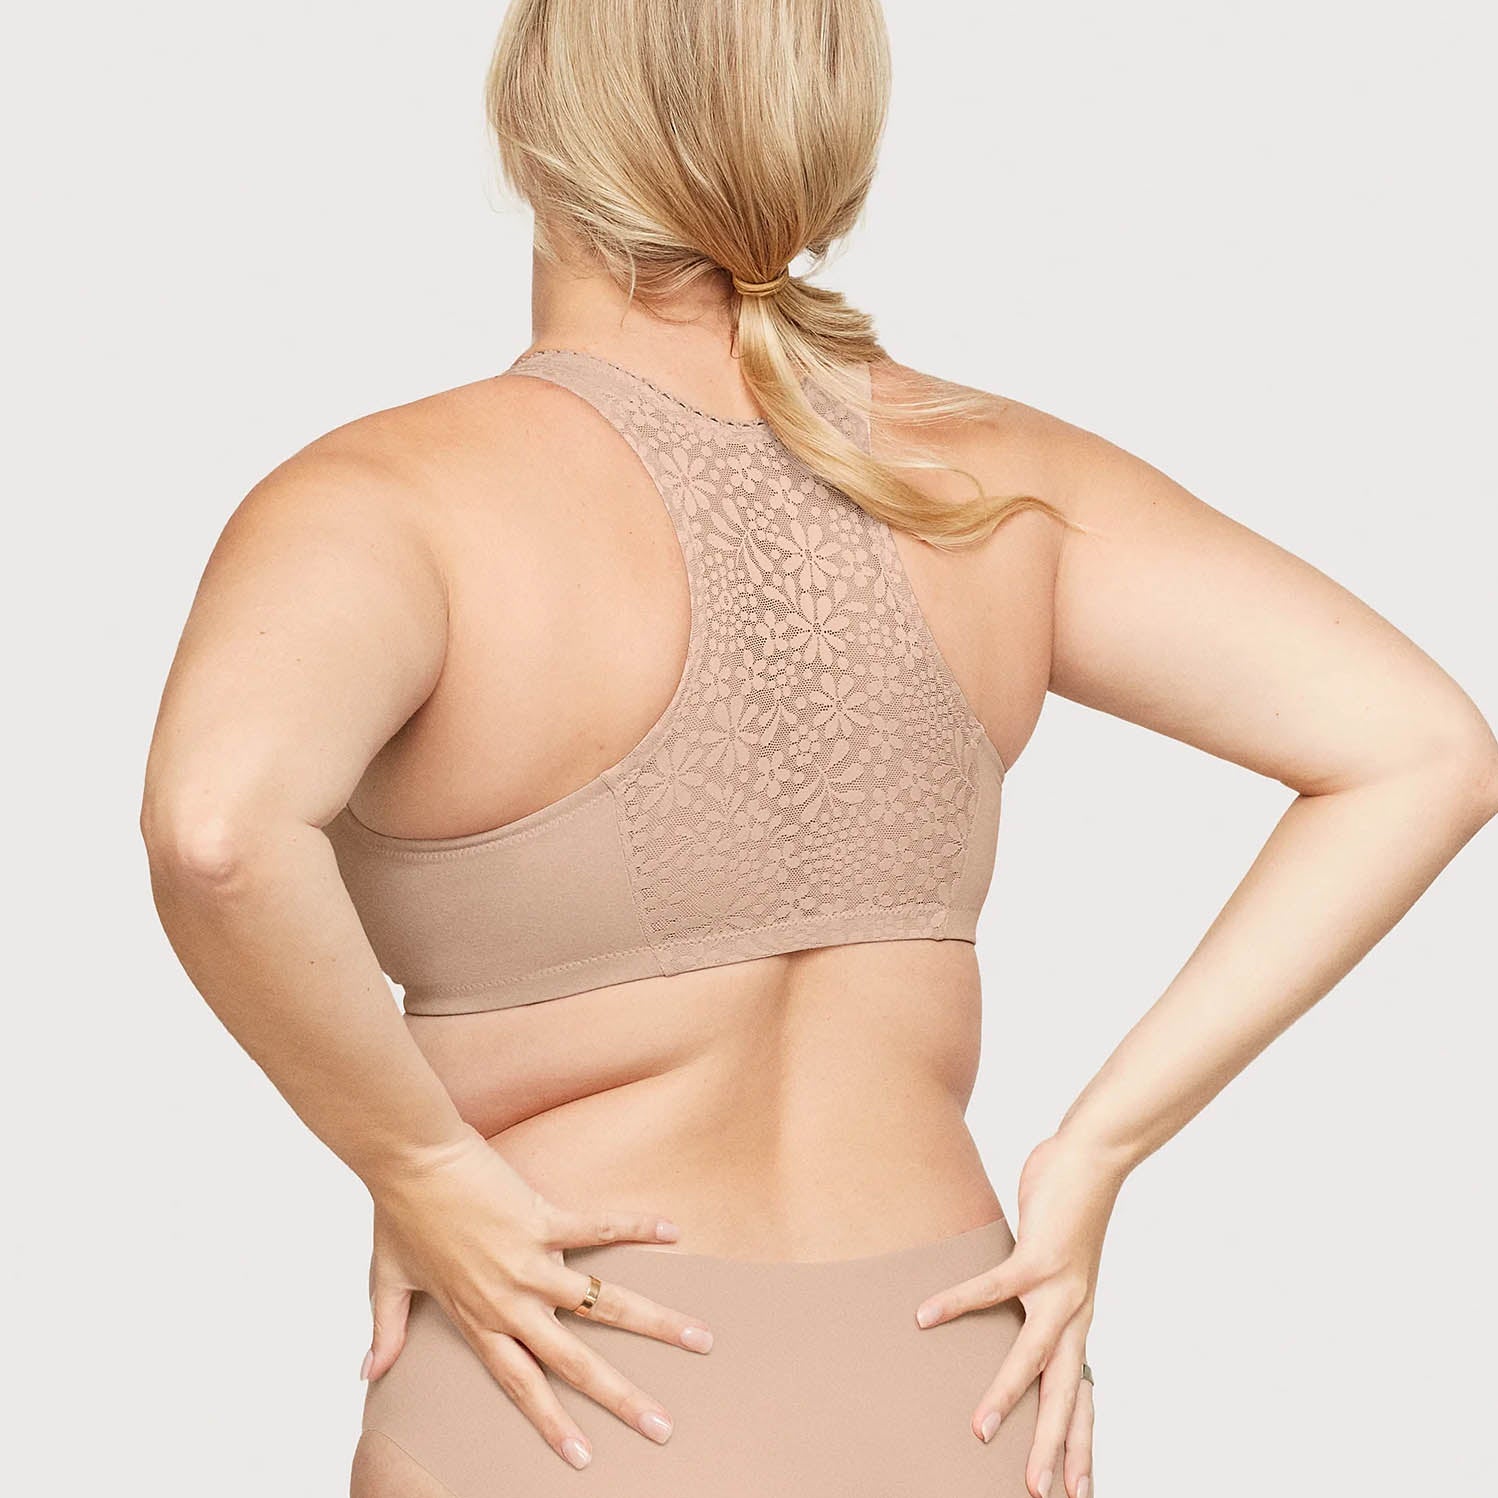 The Perfect Bra for Your Osteo Recovery – DeBra's